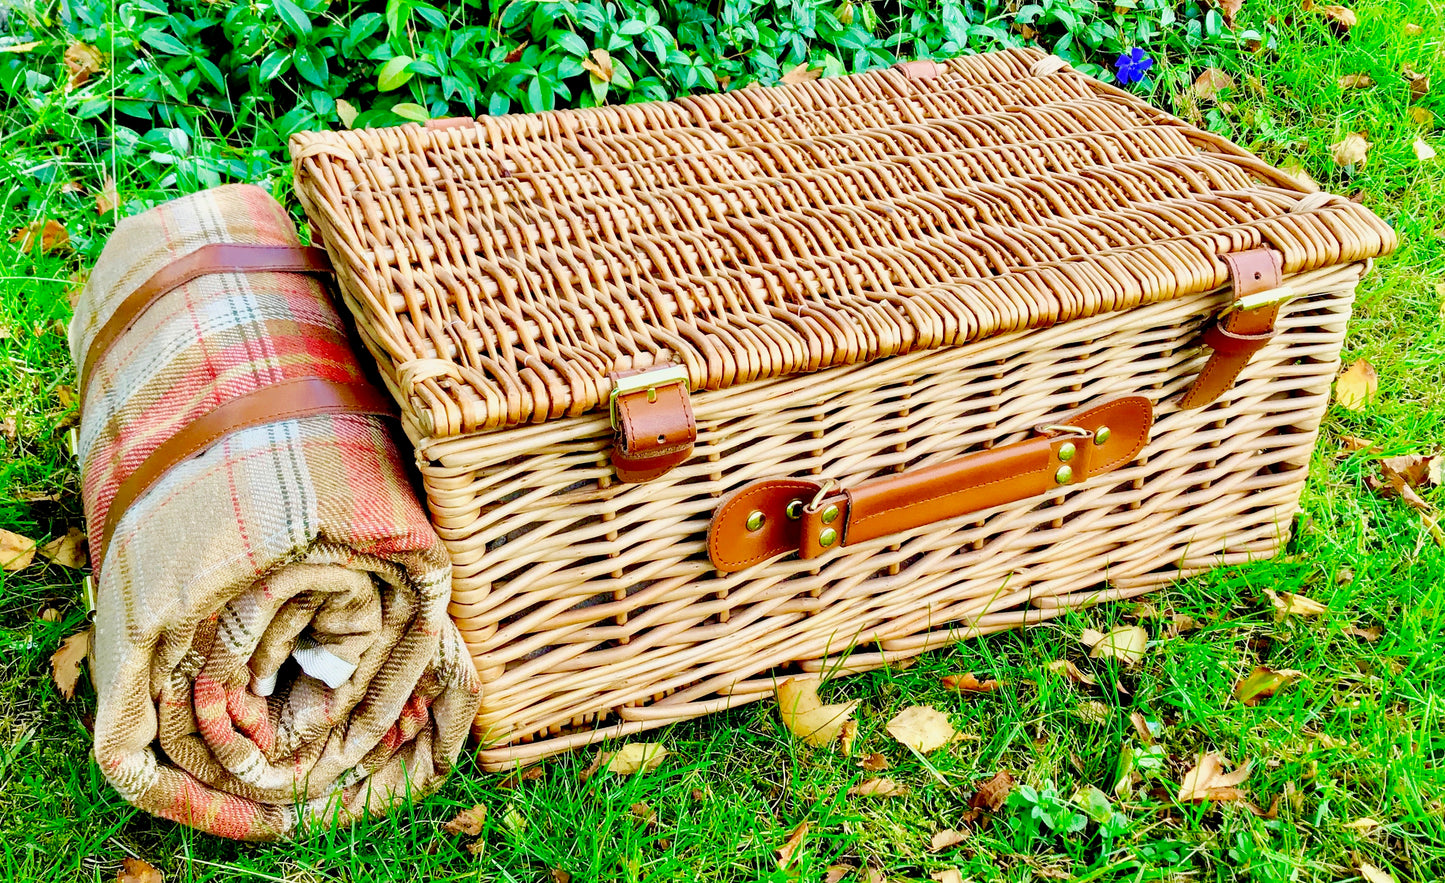 The Grange - a tweed lined willow Picnic Hamper for 4